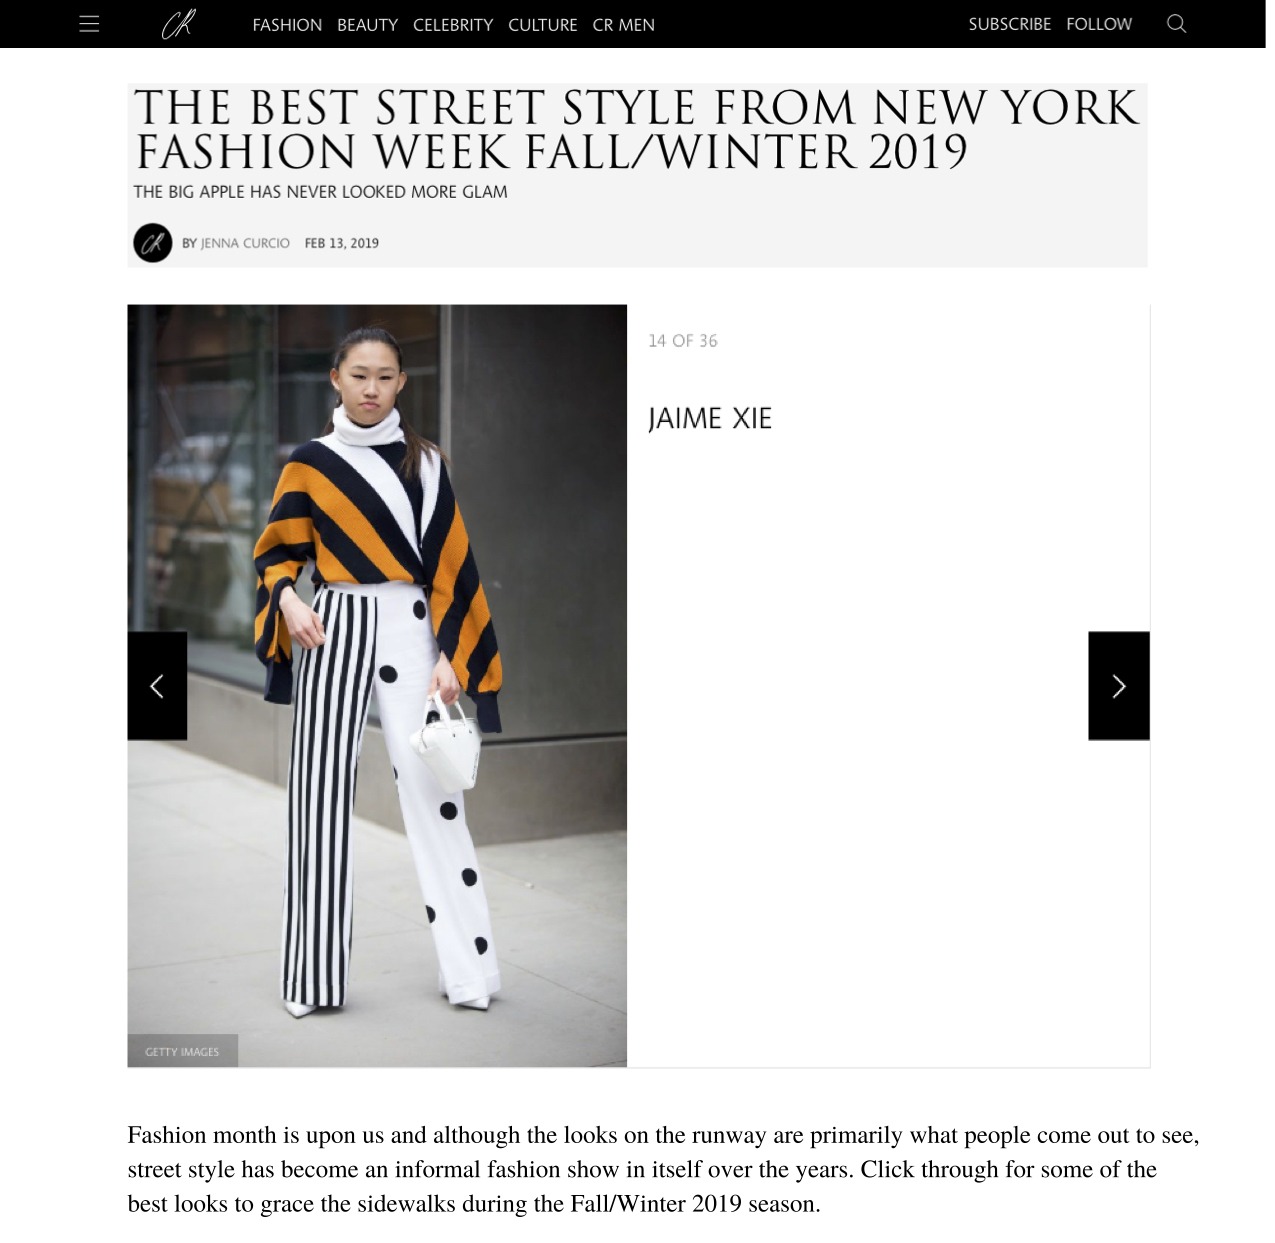 CR Fashion Book: The Best Street Style From New York Fashion Week Fall/Winter 2019